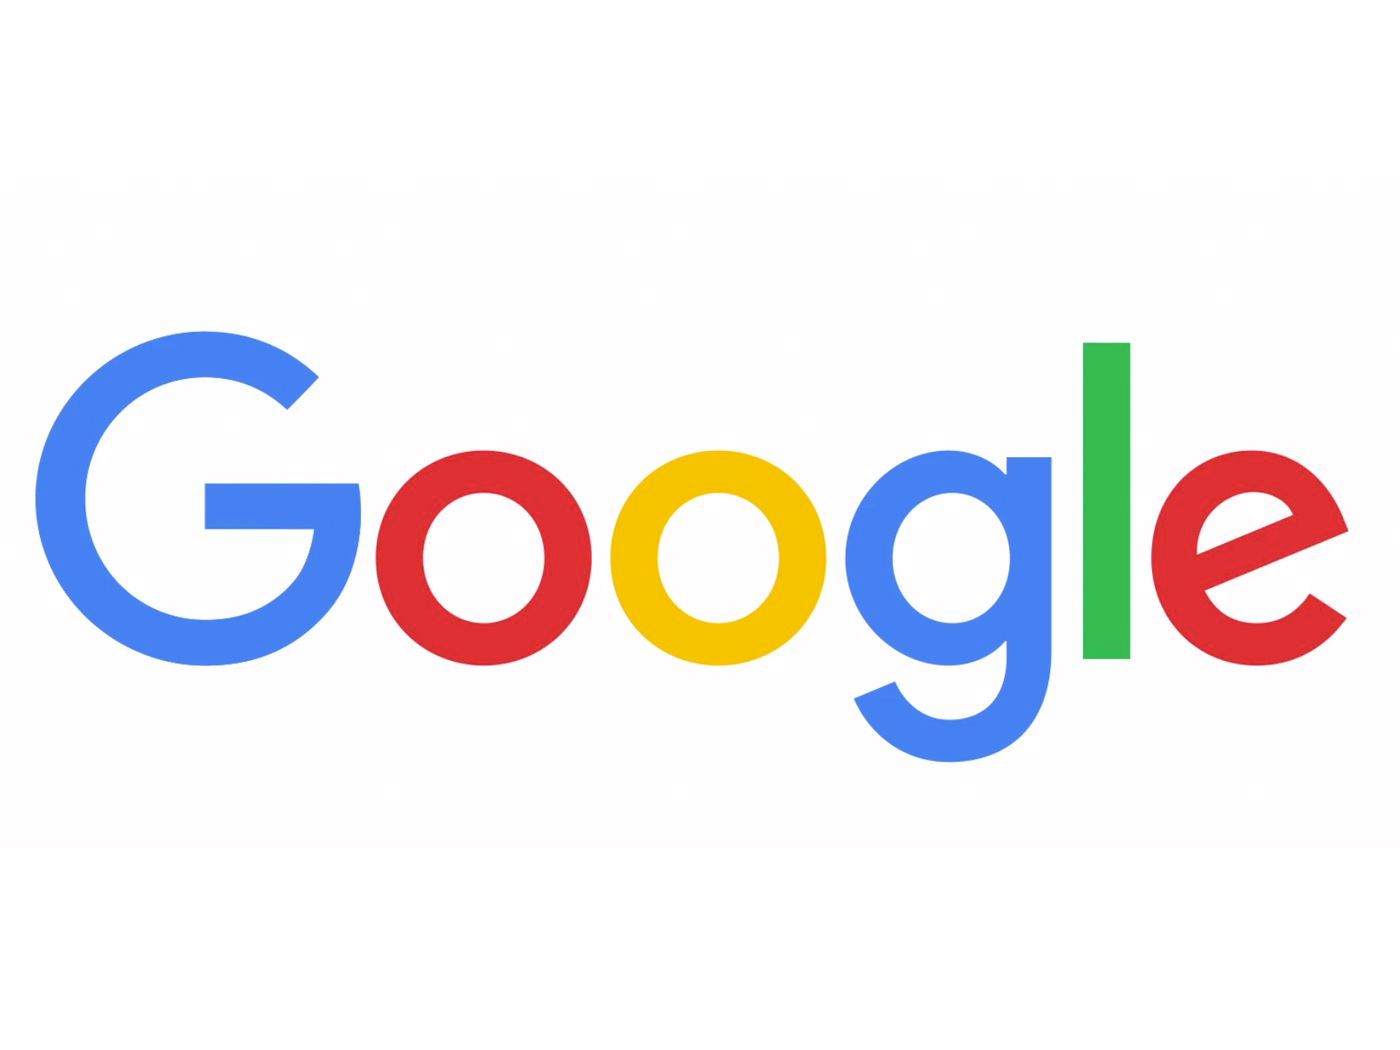 The google logo is a rainbow colored logo on a white background.